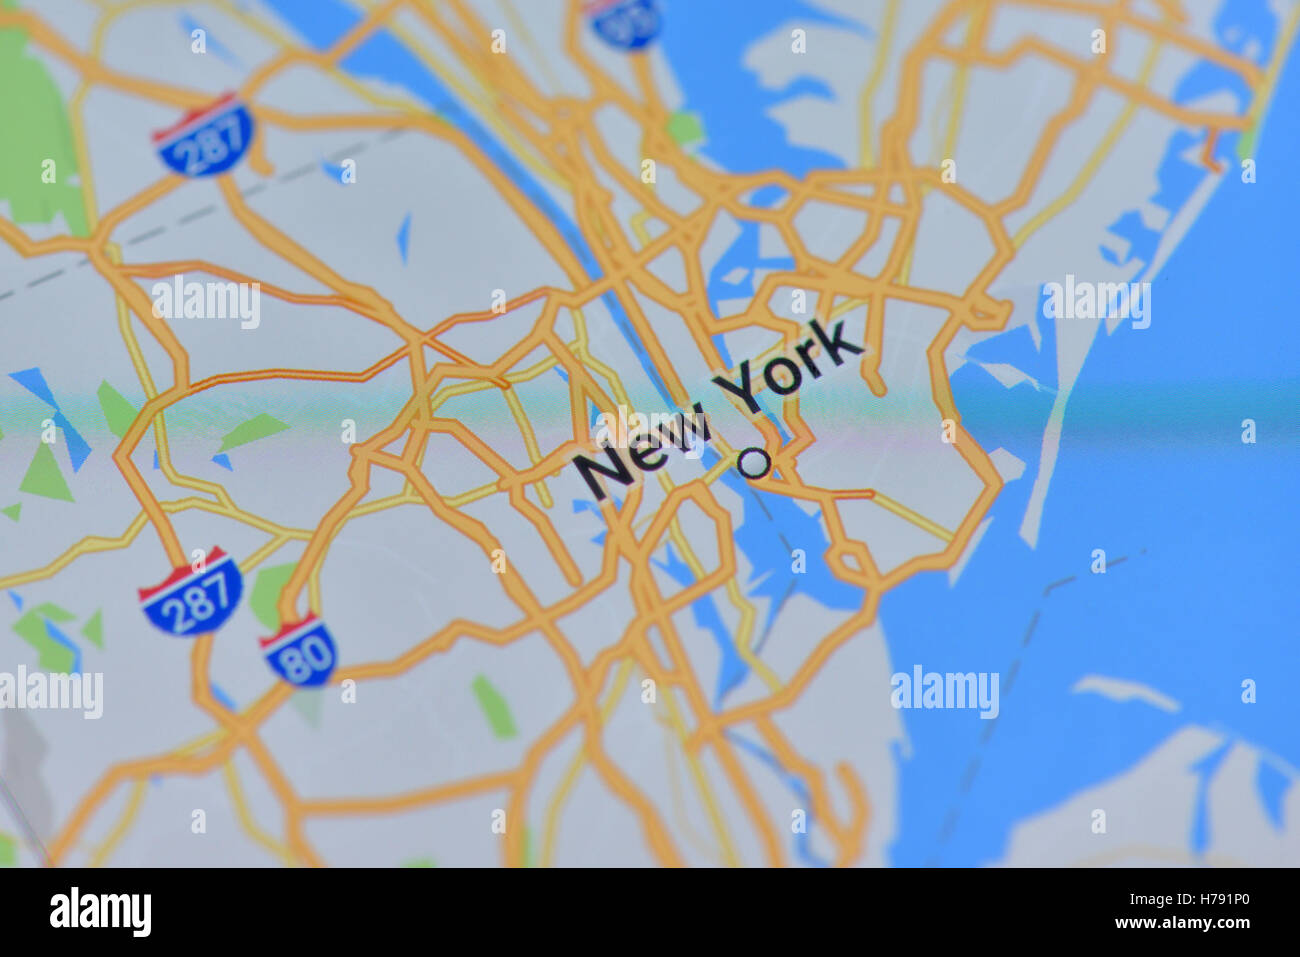 Close up view of a digital map of New York City on a smartphone display Stock Photo